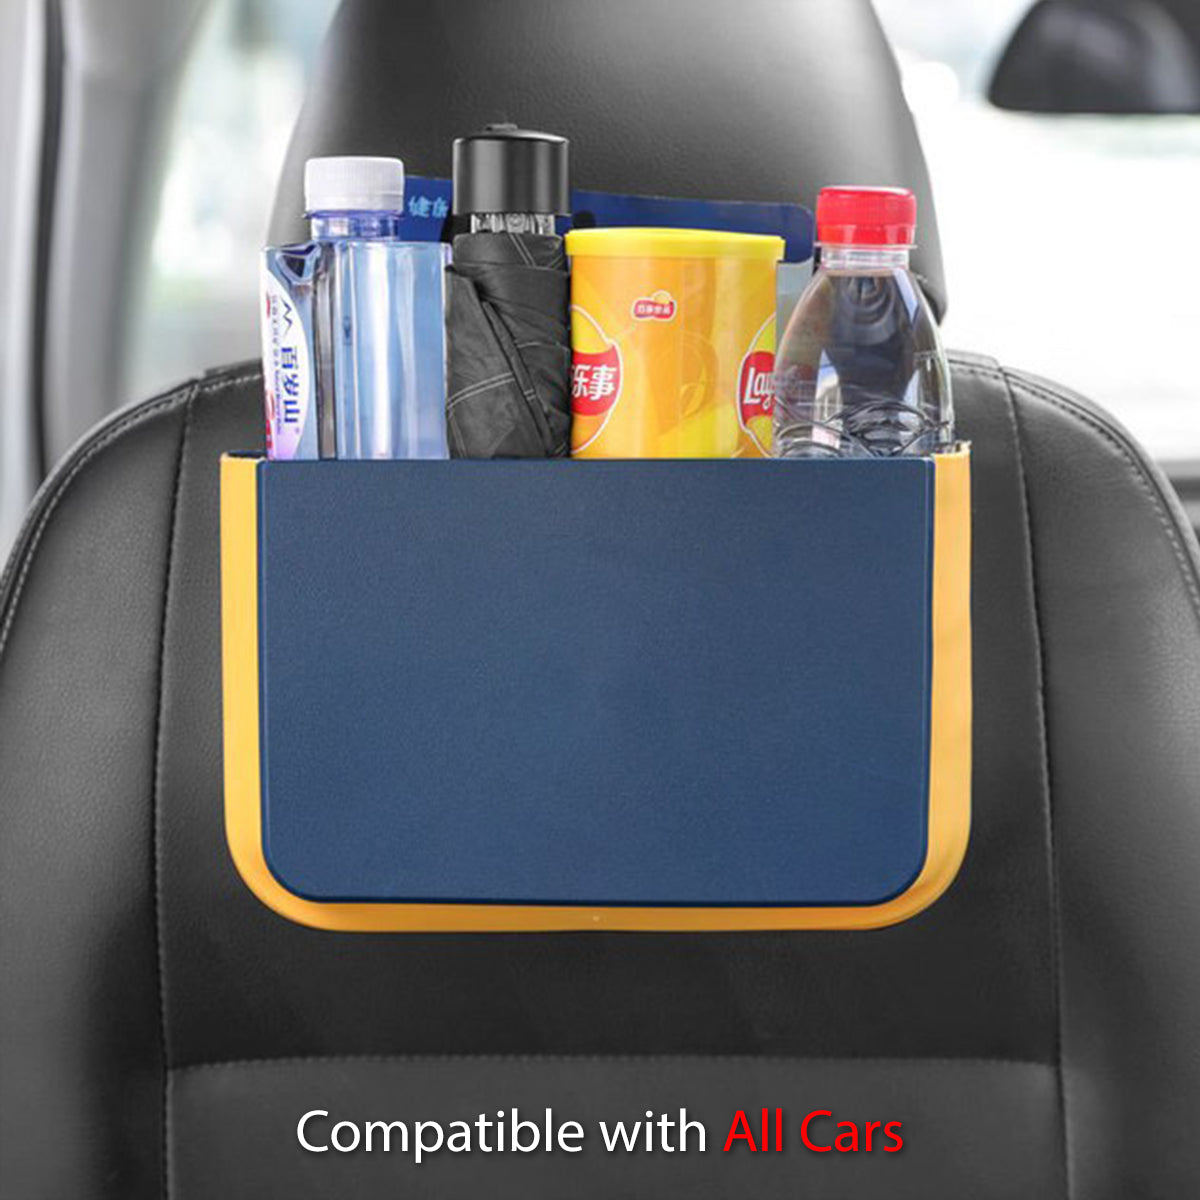 Hanging Waterproof Car Trash can-Foldable, Custom For Your Cars, Waterproof, and Equipped with Cup Holders and Trays. Multi-Purpose, Car Accessories AR11992 - Delicate Leather